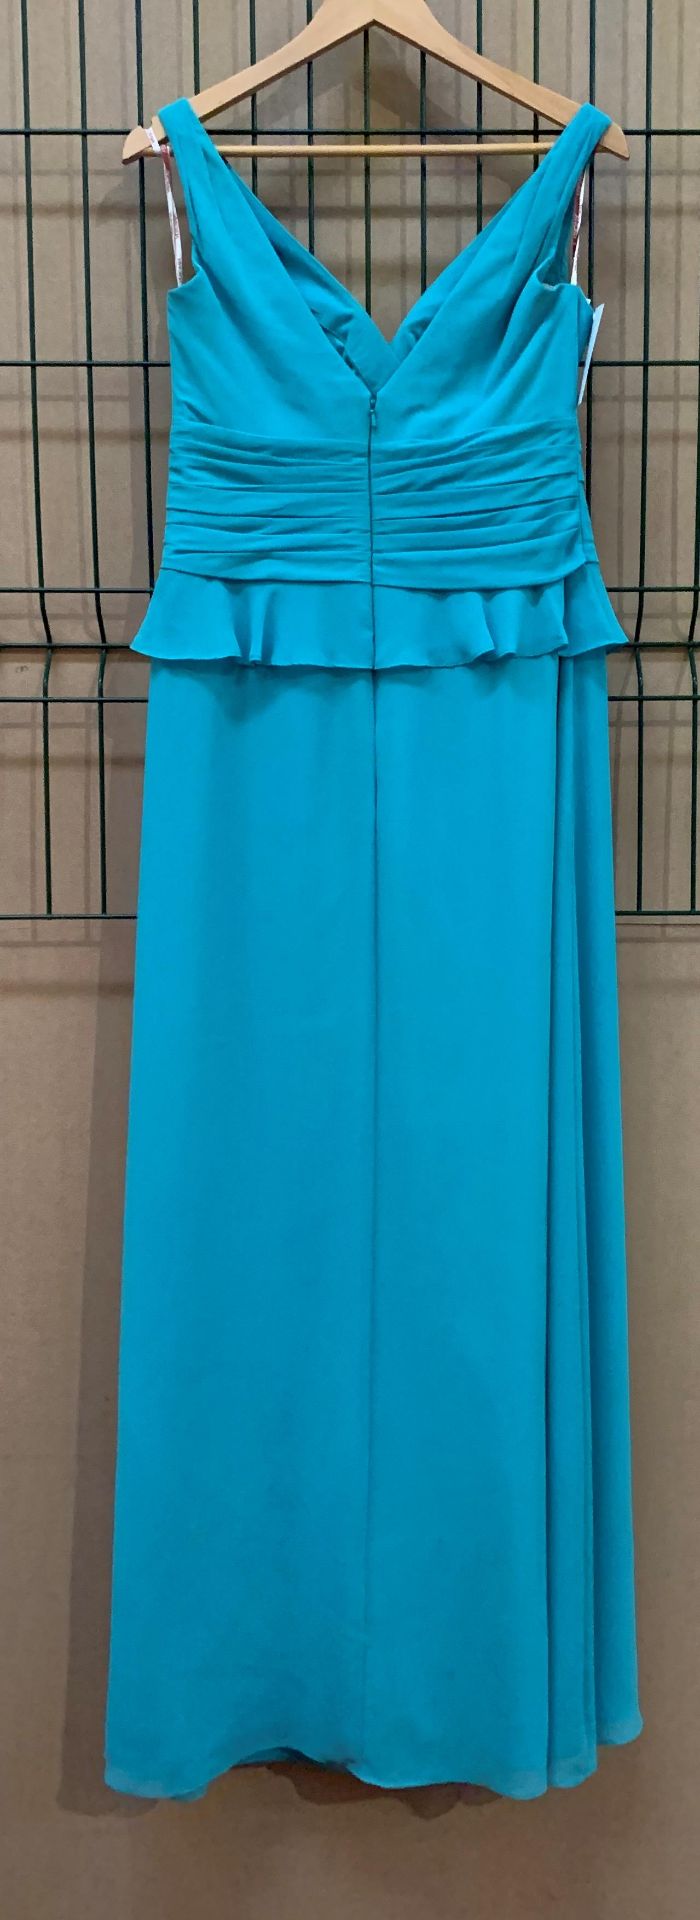 A bridesmaid/prom dress by Veromia, mode - Image 2 of 2